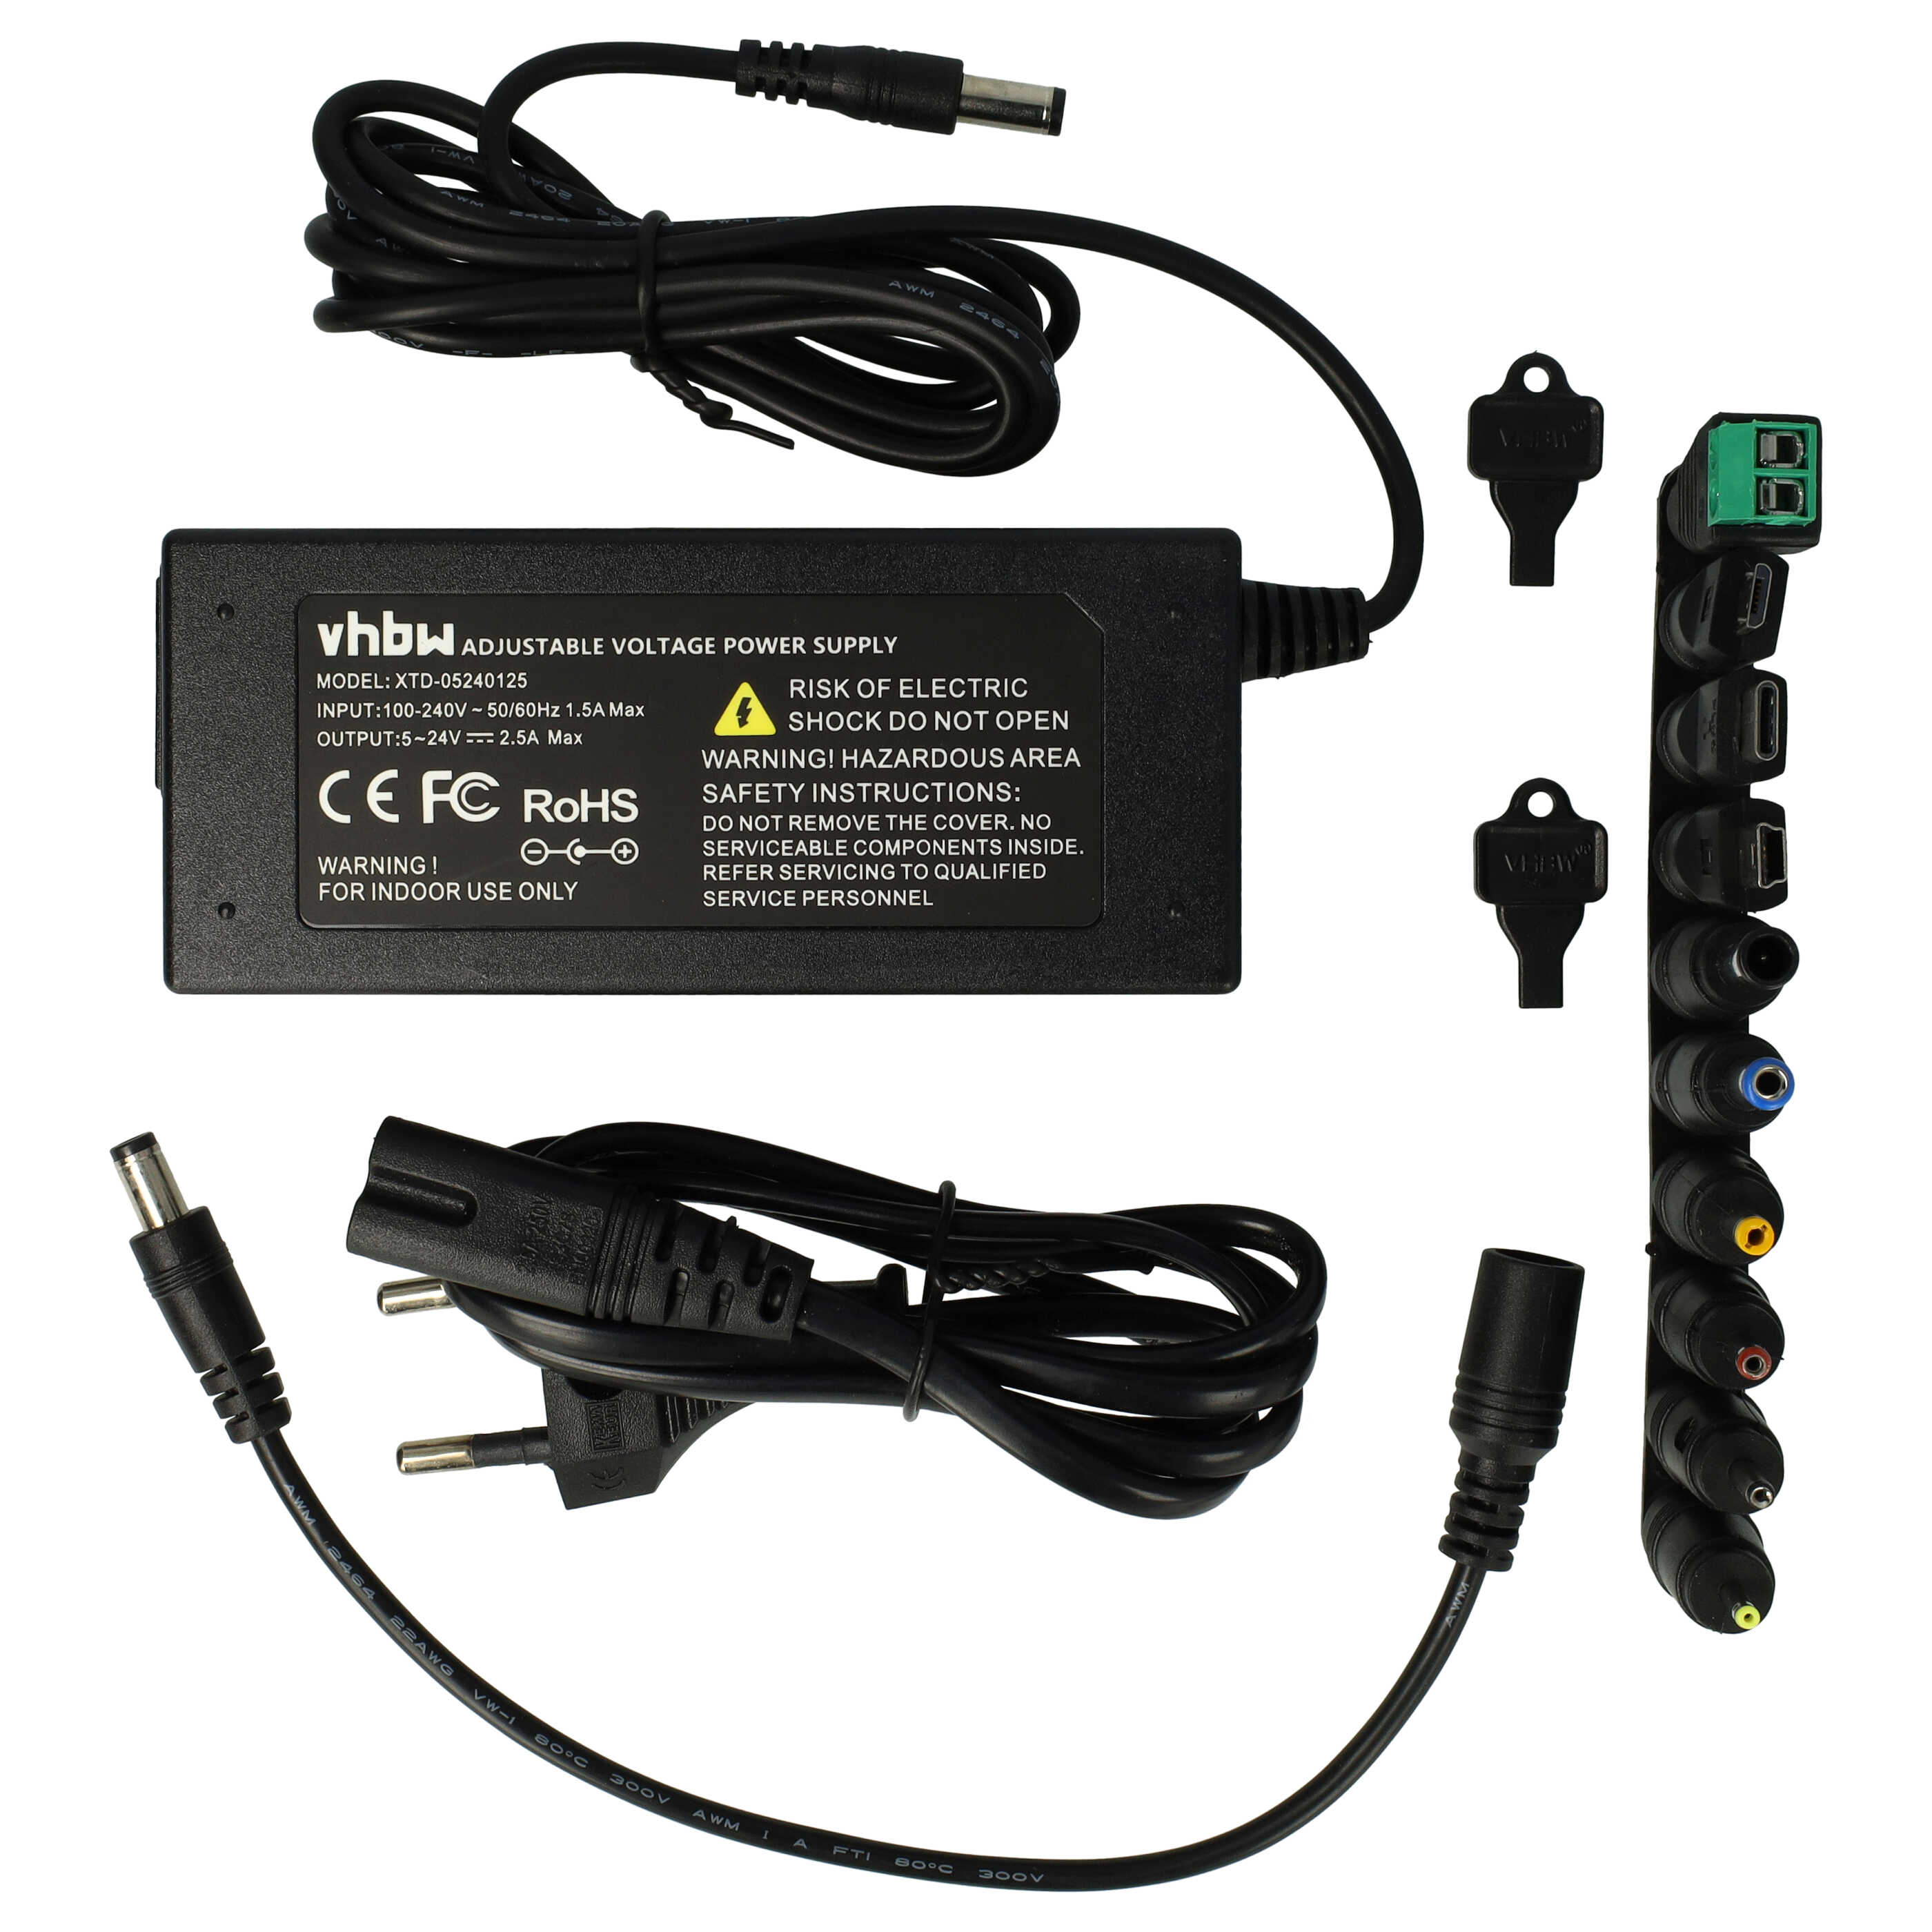 Mains Power Adapter with 10 Plugs suitable for various Electric Devices - 200 cm 5-24 V, 0.1-2.5 A